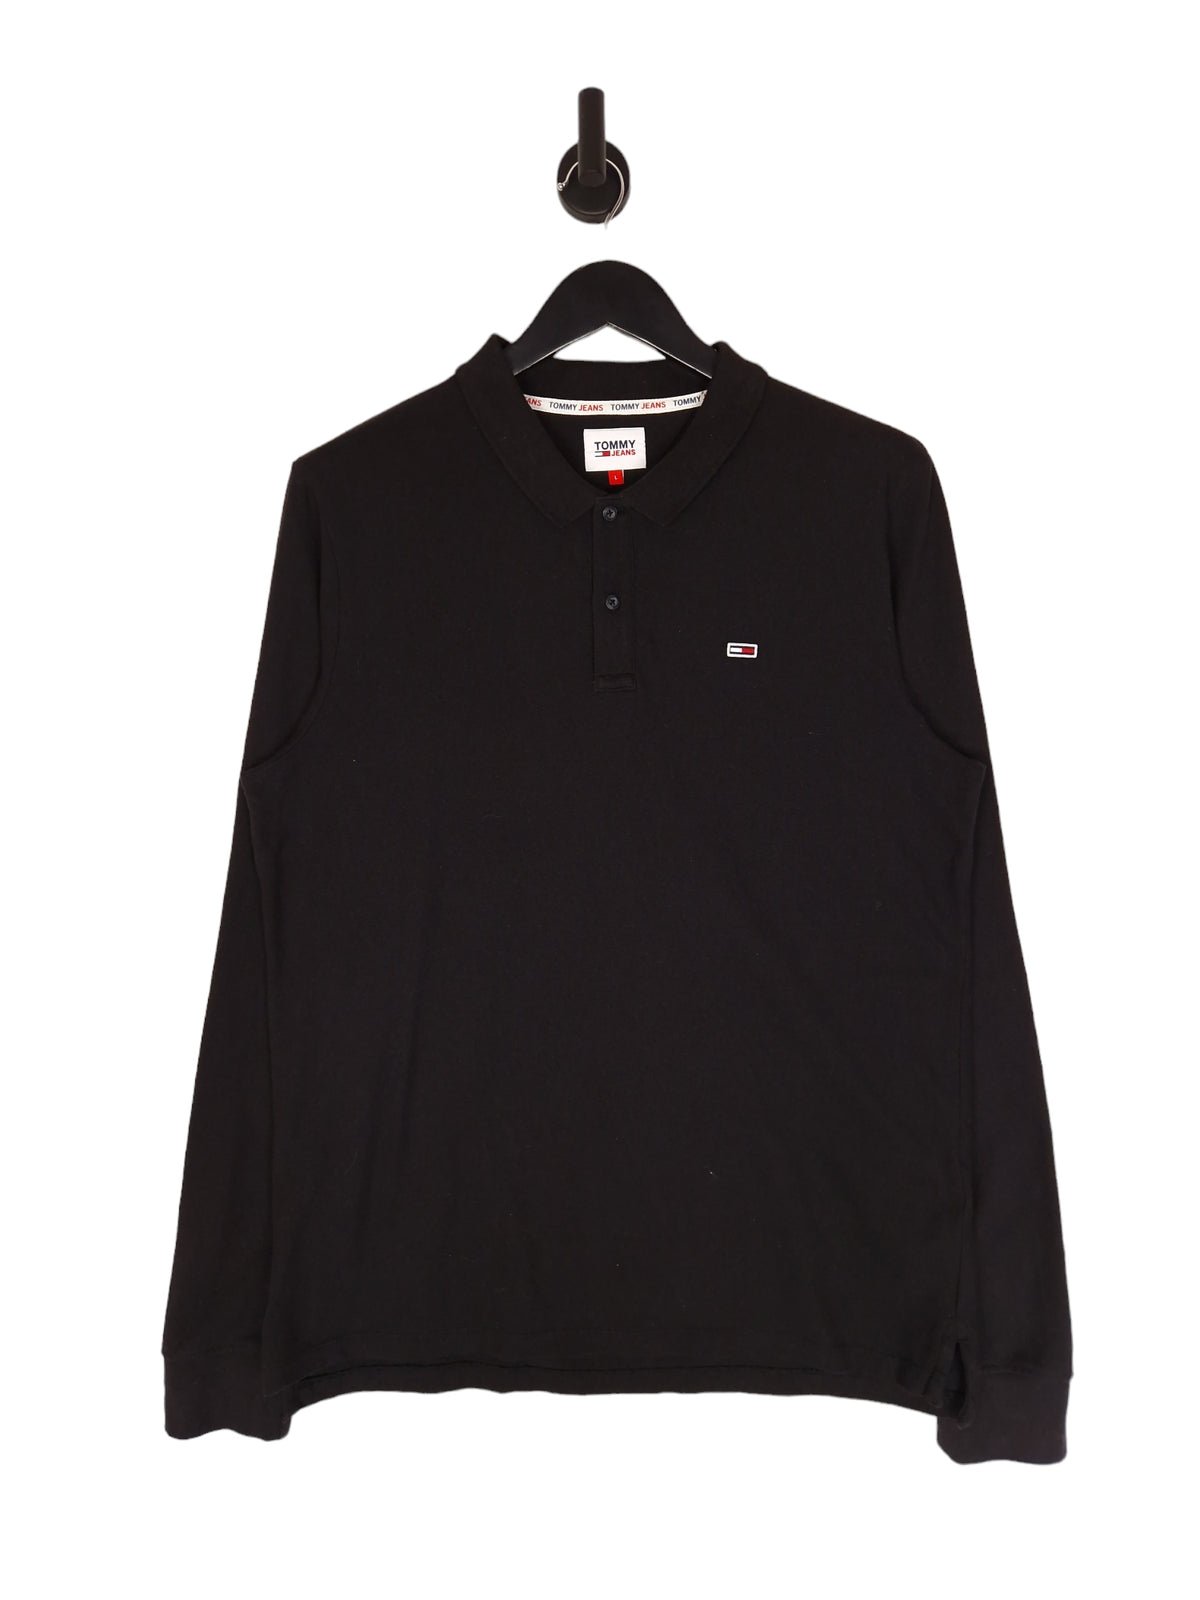 Tommy Jeans Long Sleeve Polo Shirt - Size Large